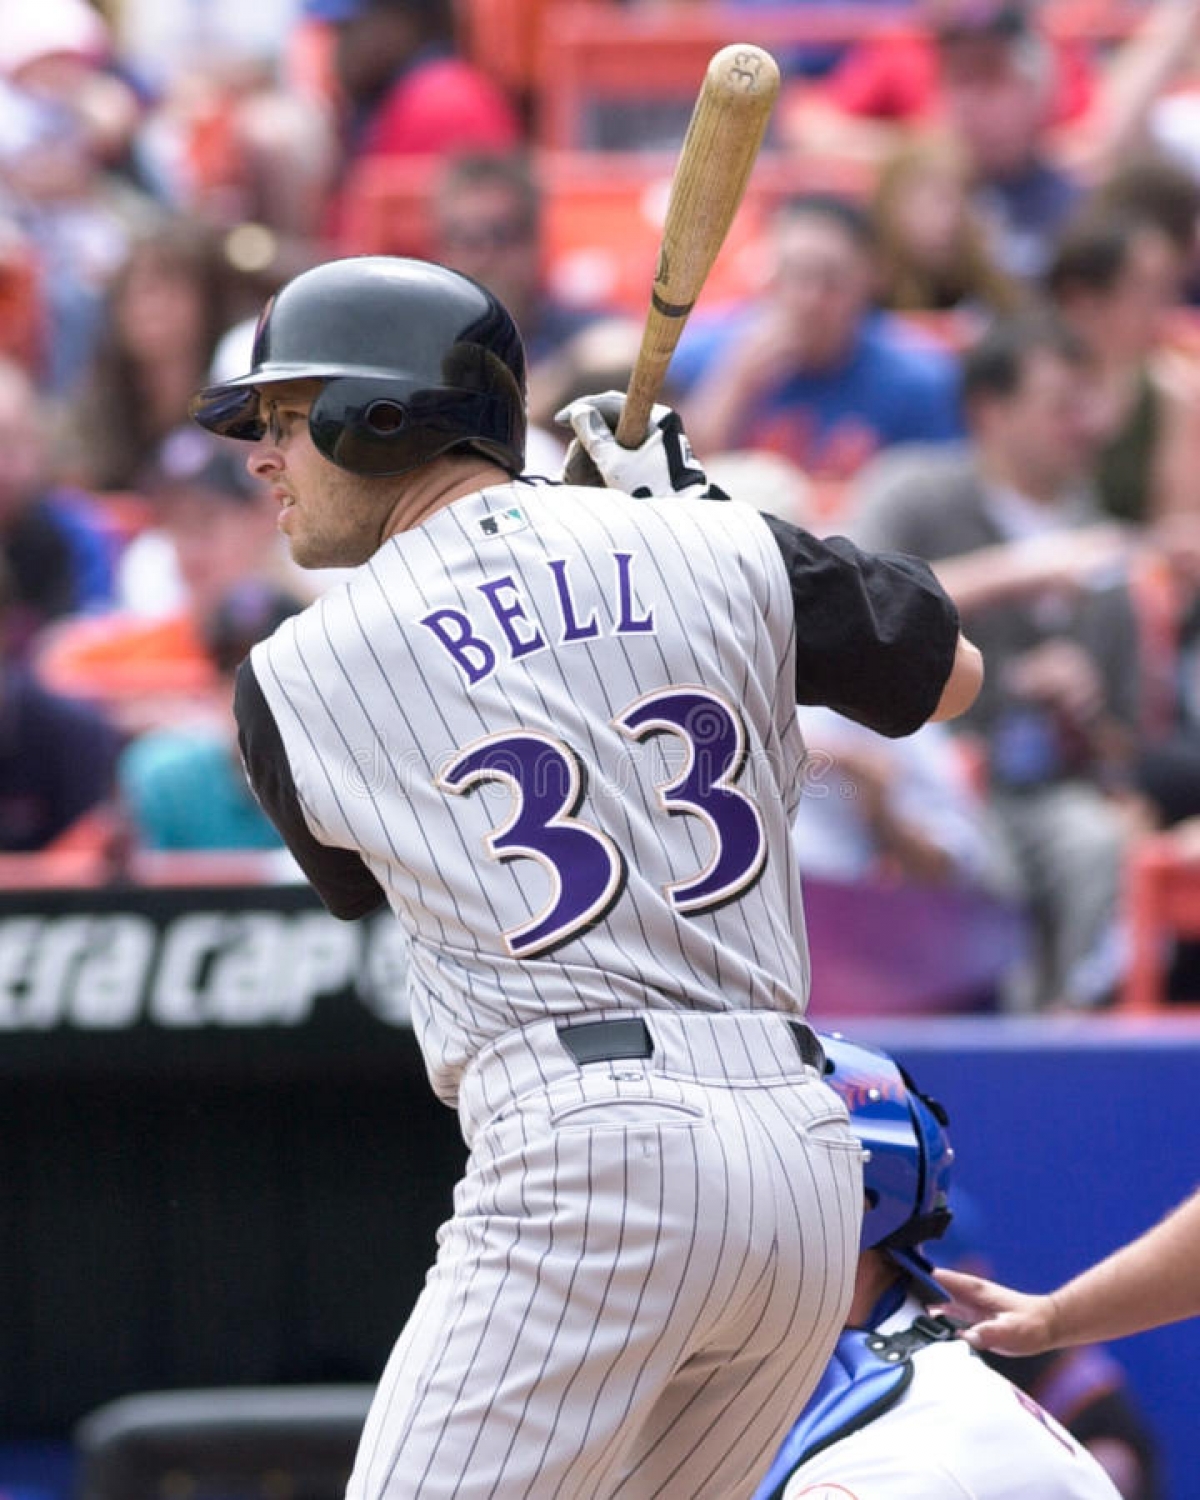 Not in Hall of Fame - 24. Jay Bell